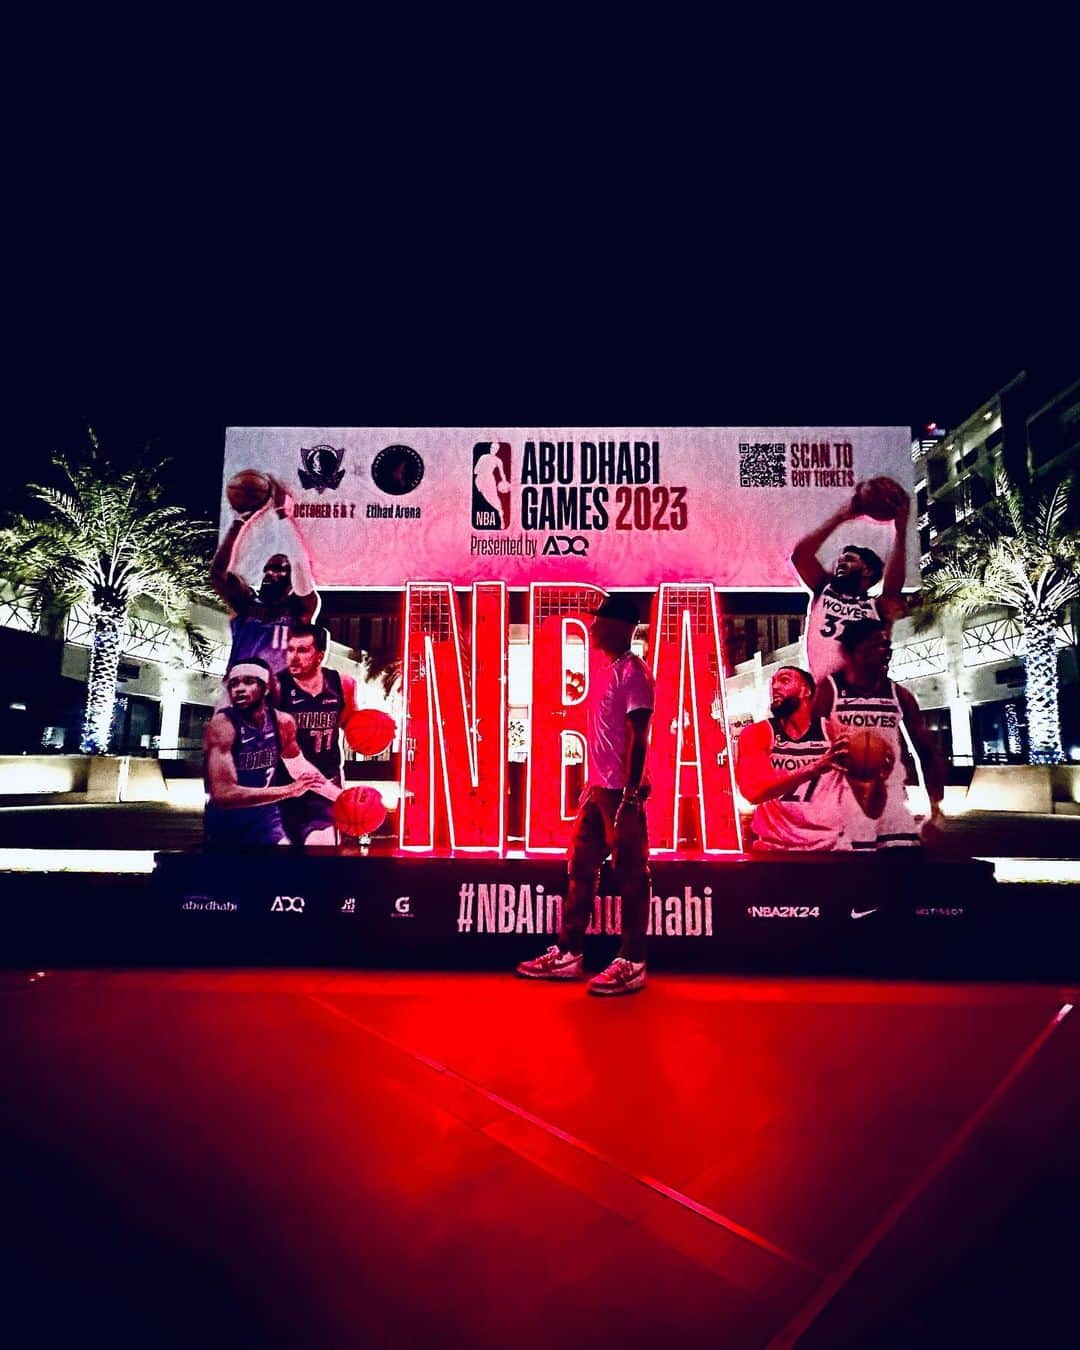 A.J.のインスタグラム：「Ok that’s a wrap on today. This guys gotta get to bed. Long day tomm! Thanks again @nbaarabic for the invite. Like this one song I know says”as long as they’ll be music or basketball I’ll be coming back again!” Night all!」